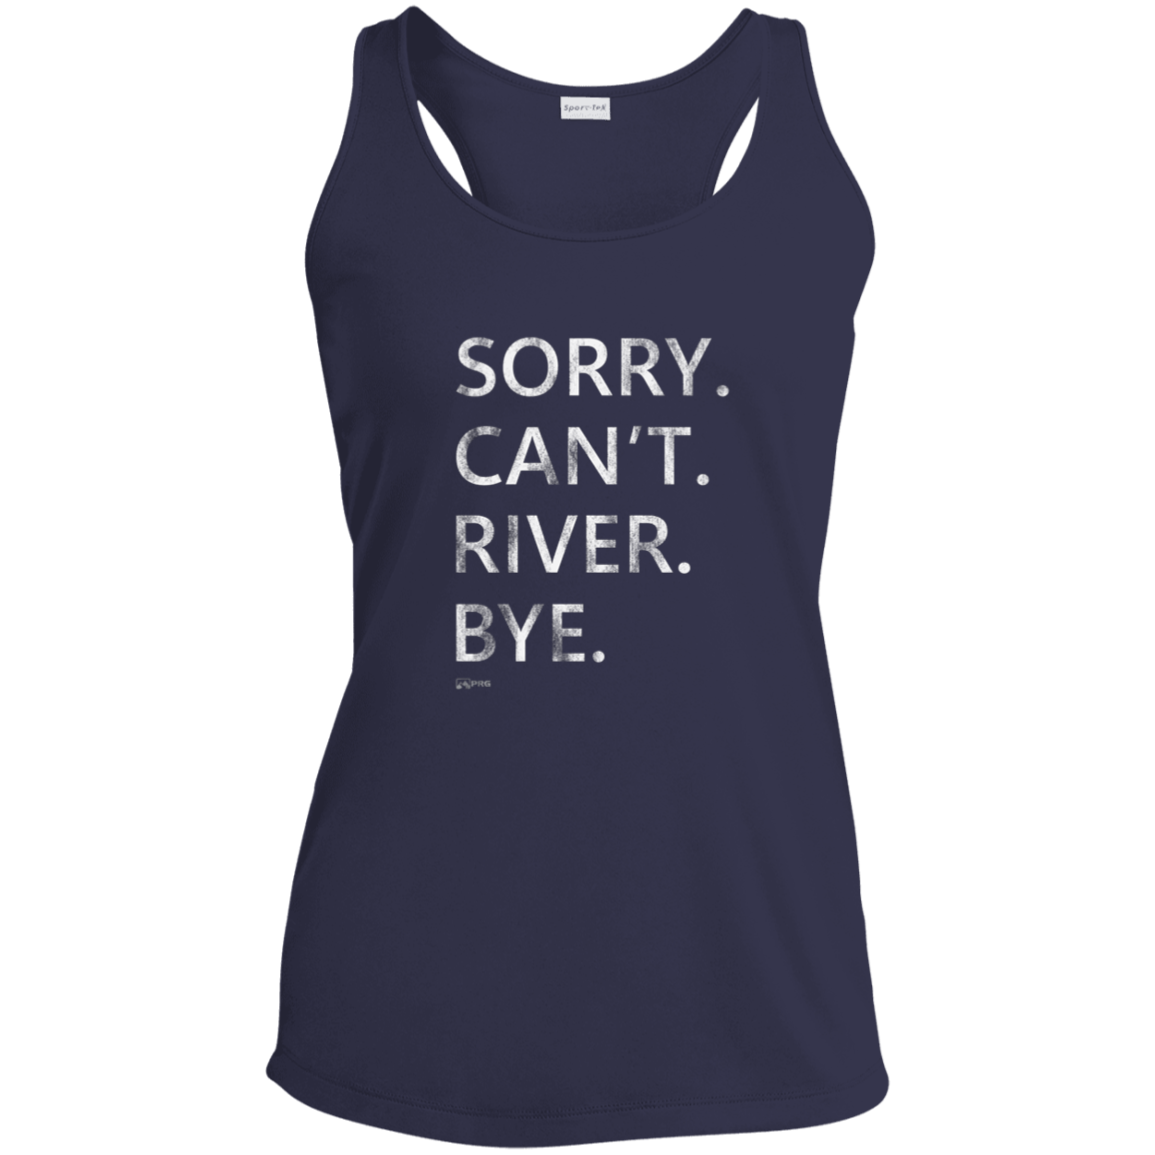 Sorry. Can't. River. Bye. - Womens Racerback